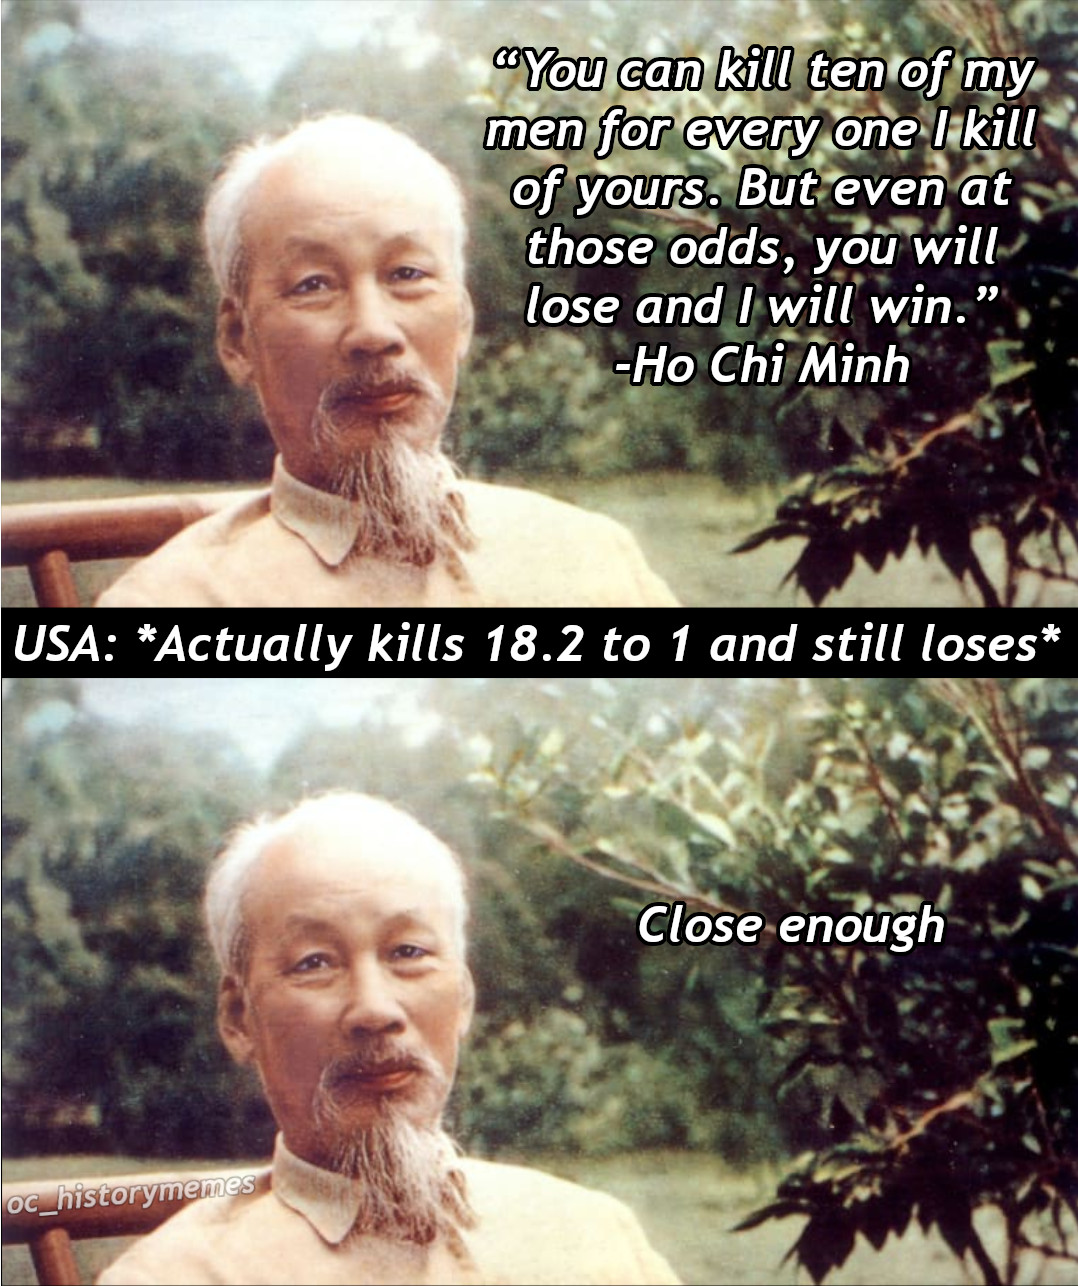 photo caption - CoYou can kill ten of my men for every one I kill of yours. But even at those odds, you will lose and I will win.' Ho Chi Minh Usa Actually kills 18.2 to 1 and still loses Close enough oc_historymemes